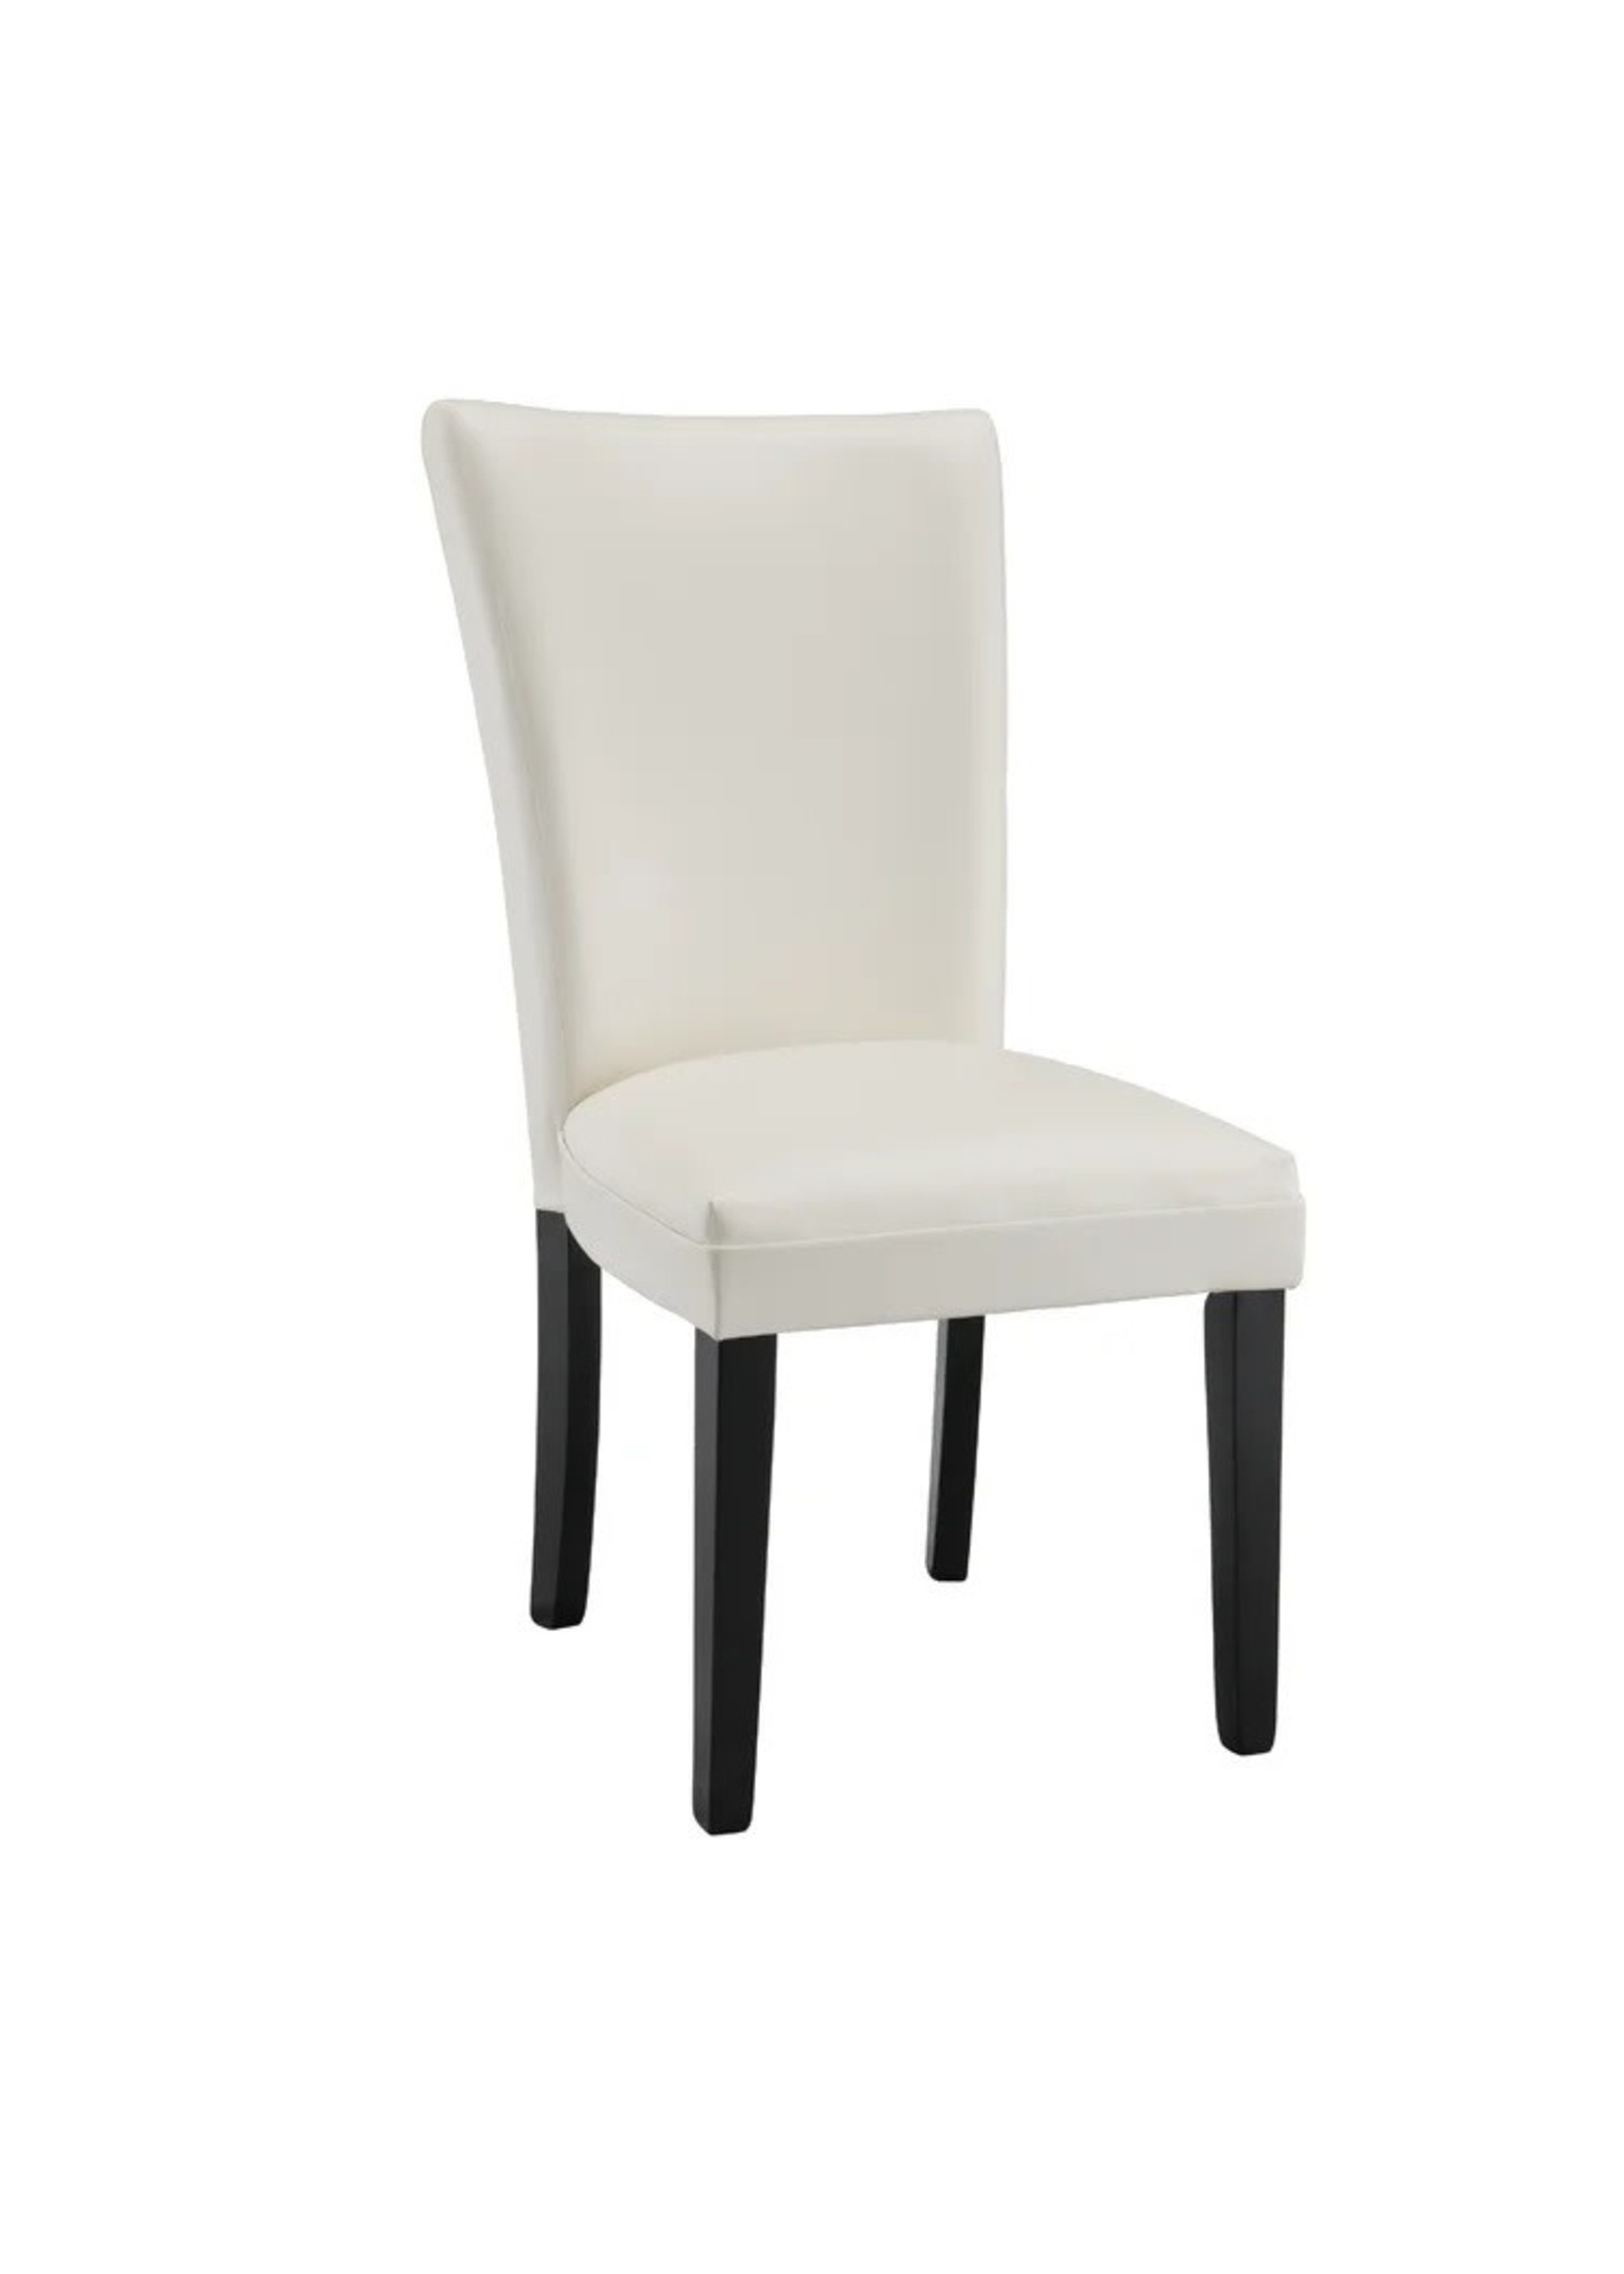 *Faux Leather Upholstered Side Chairs - Set of 2 - White